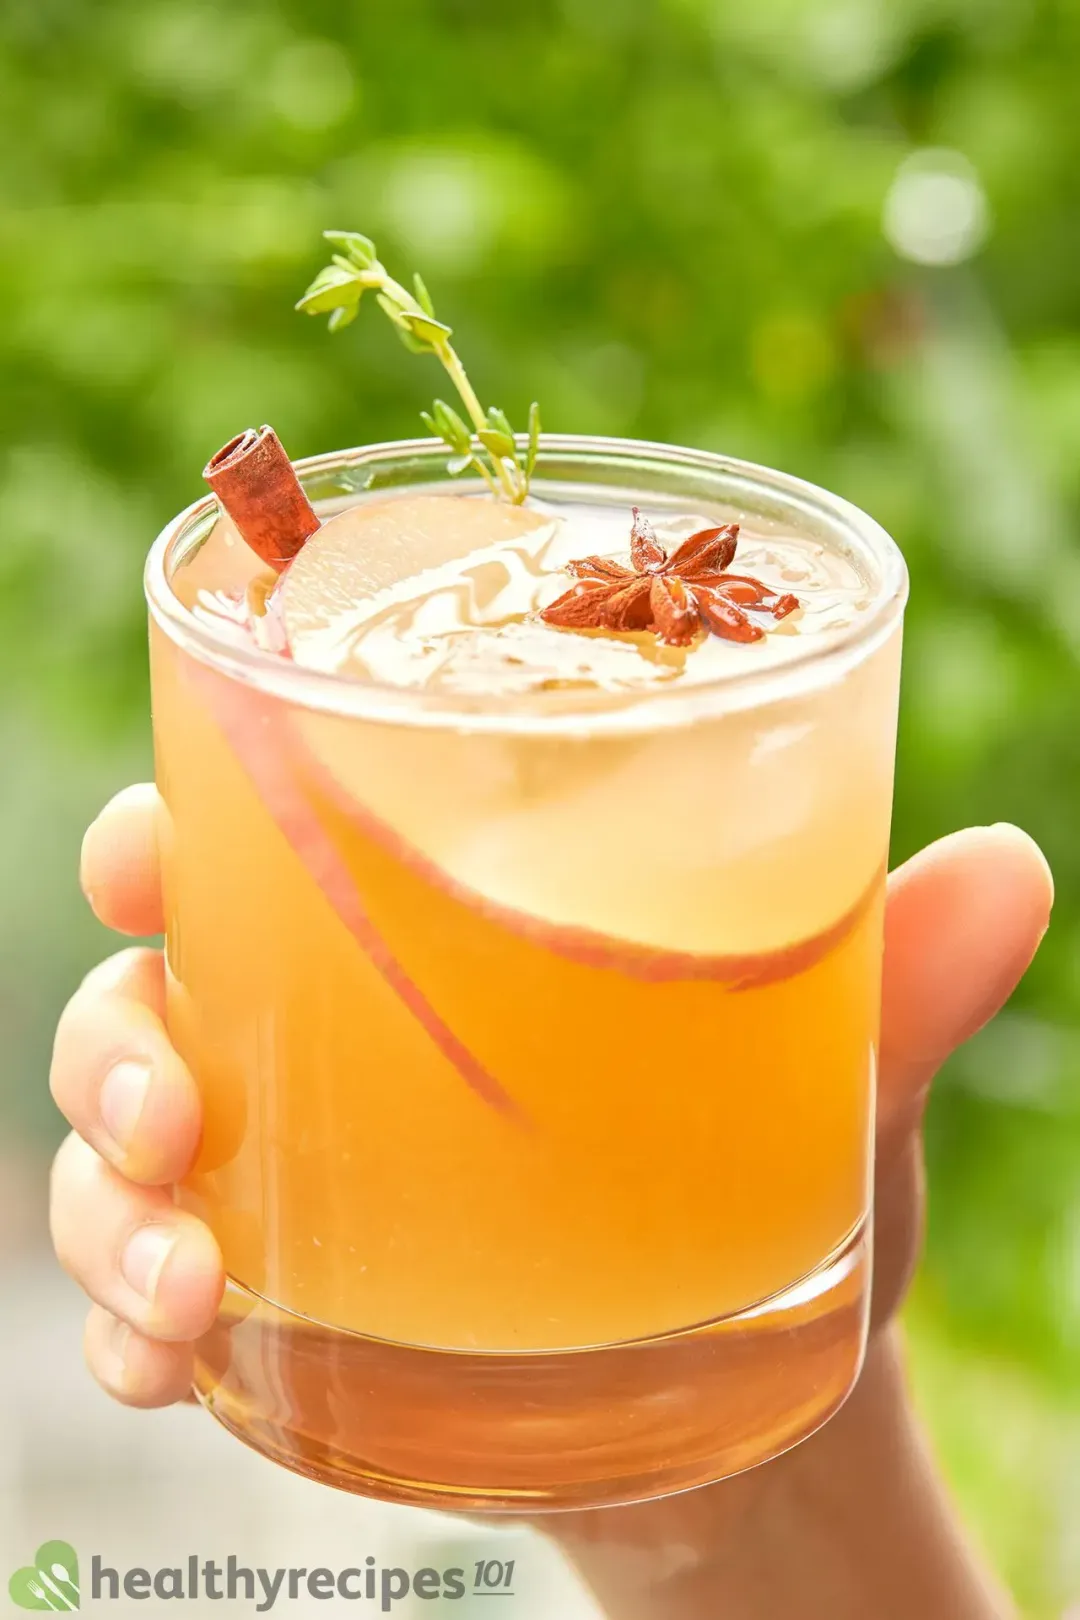 A hand holding a glass of apple cider cocktail, filled with a rosemary sprig, a star anise, and apple slices